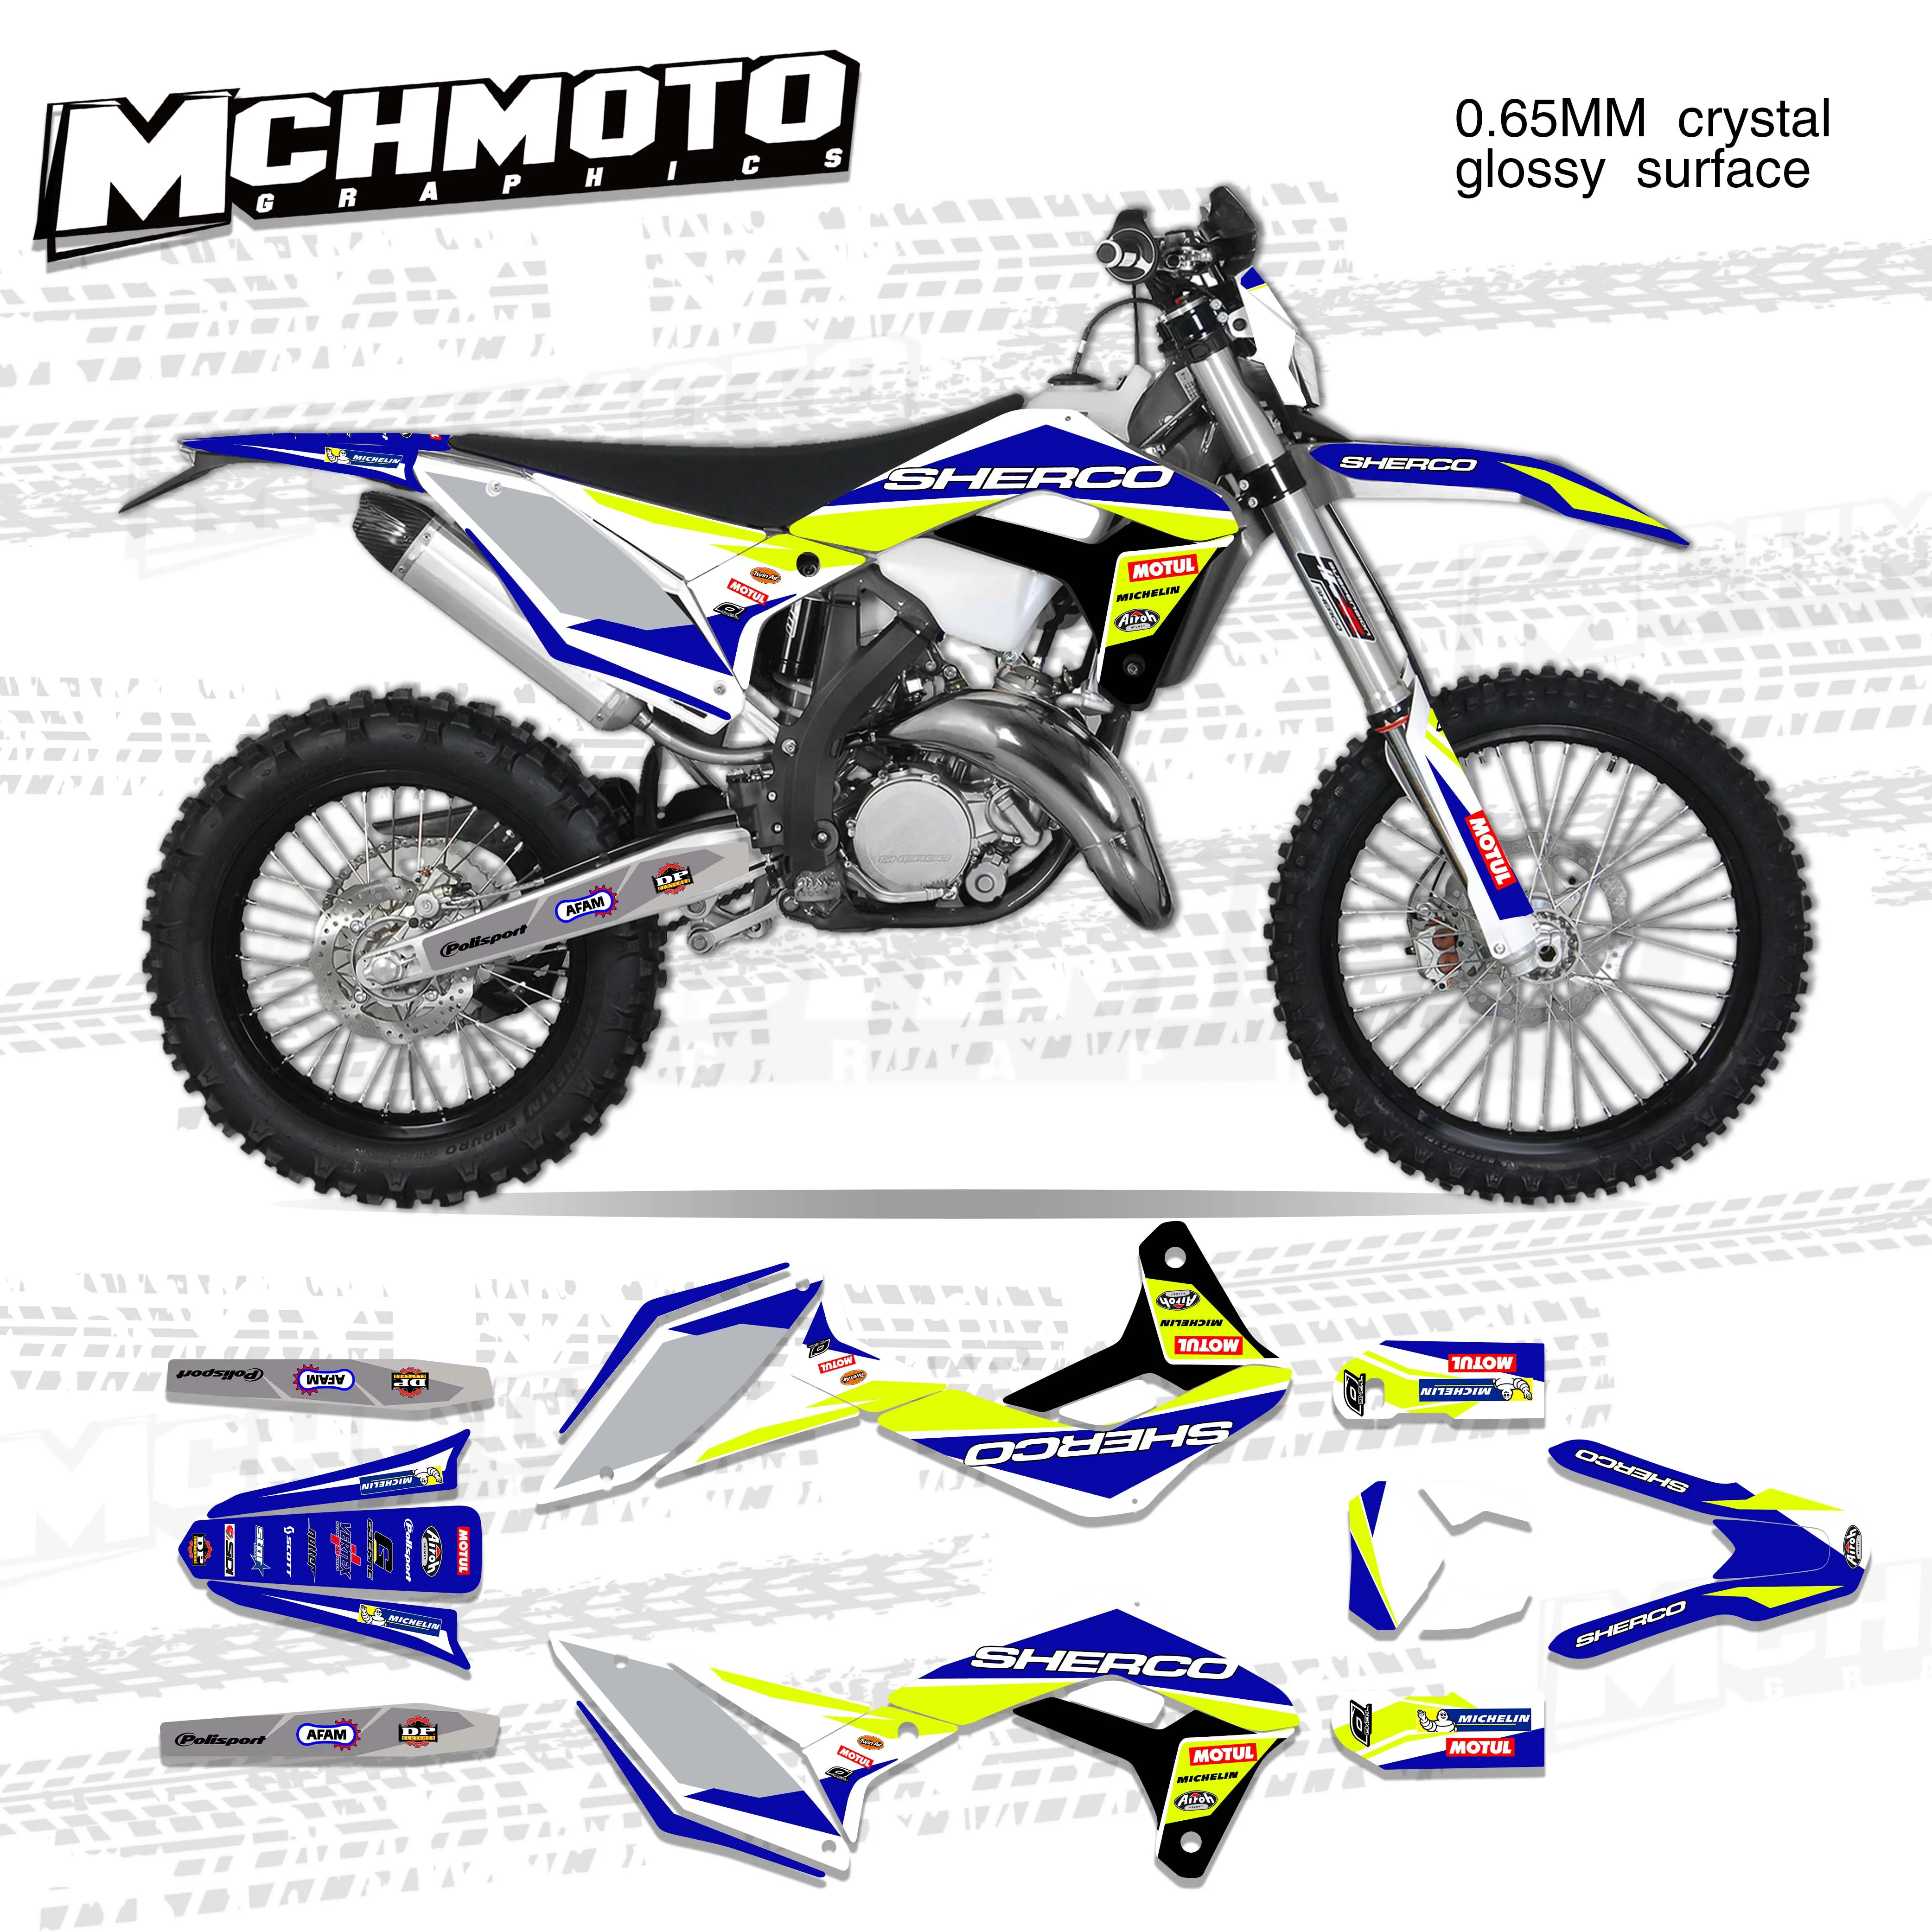 MCHMFG   Decal for Sherco SE SEF SER 125 250 300 450 2017 2018 2019 2020 Motorcycle Fairing Sticker graphics